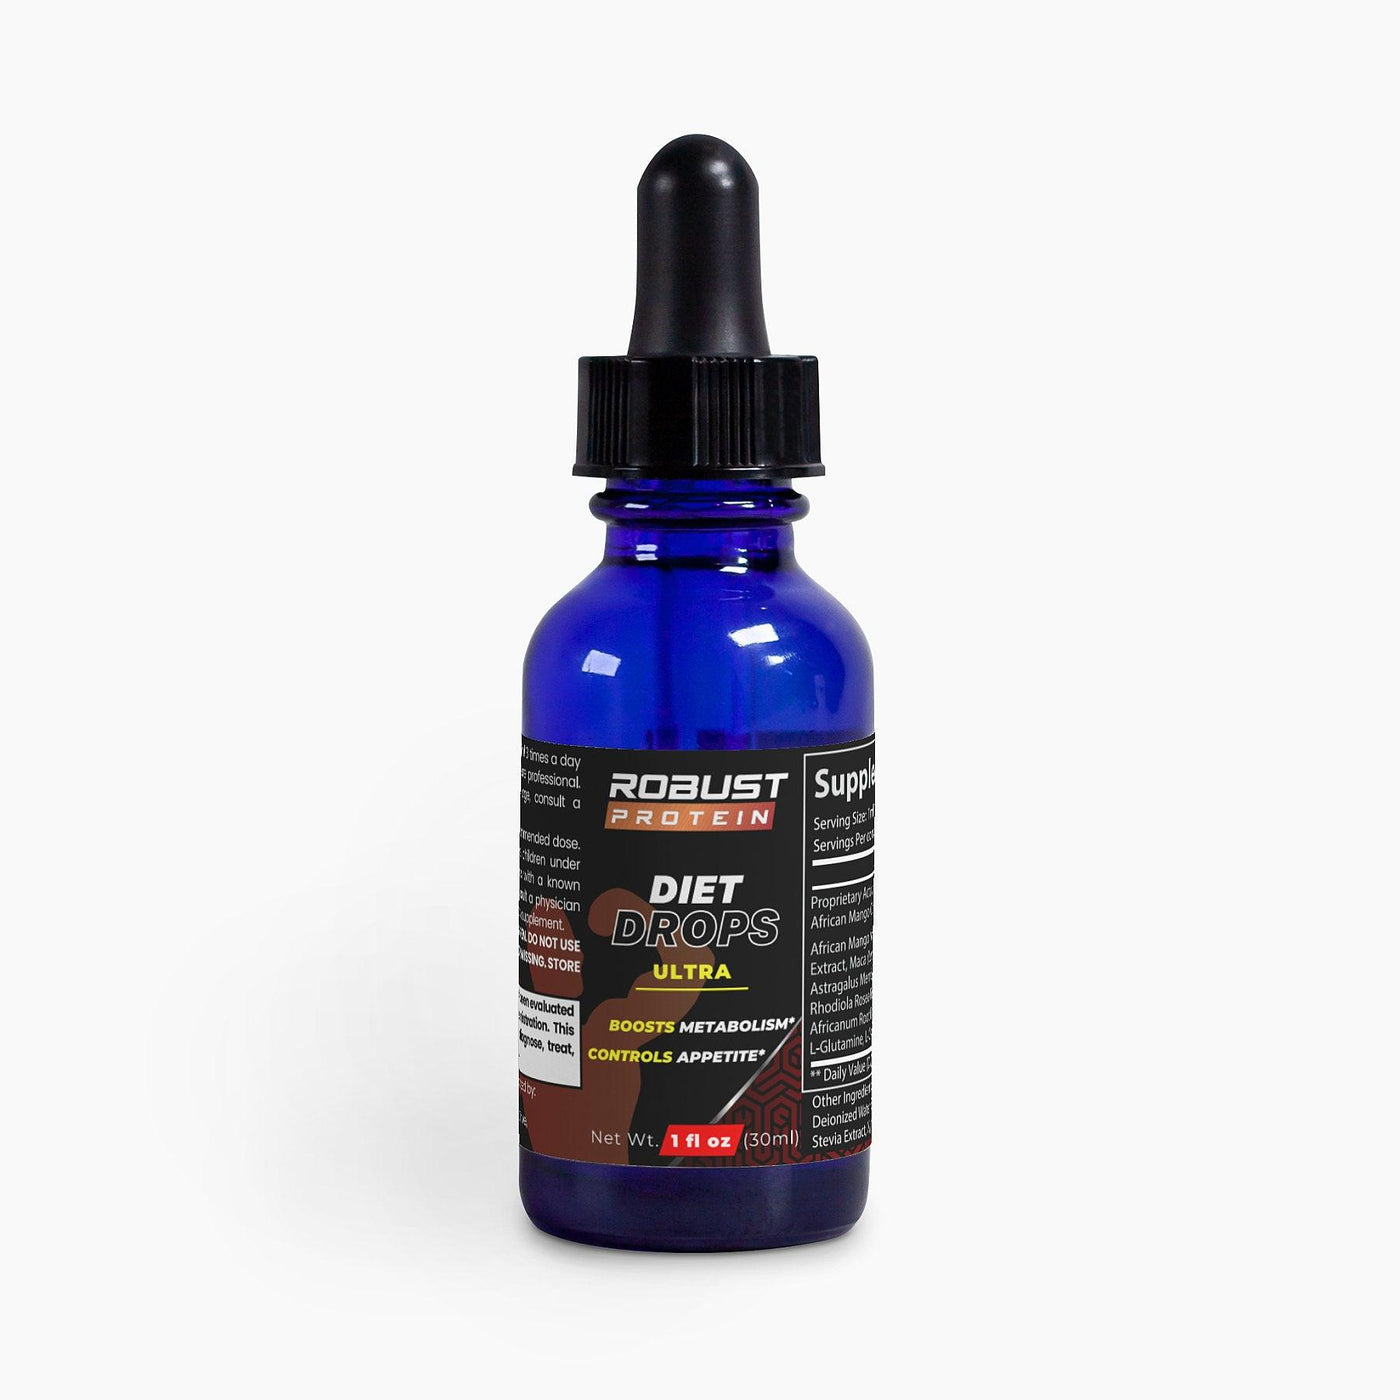 Diet Drops Ultra 1 oz - Robust Protein